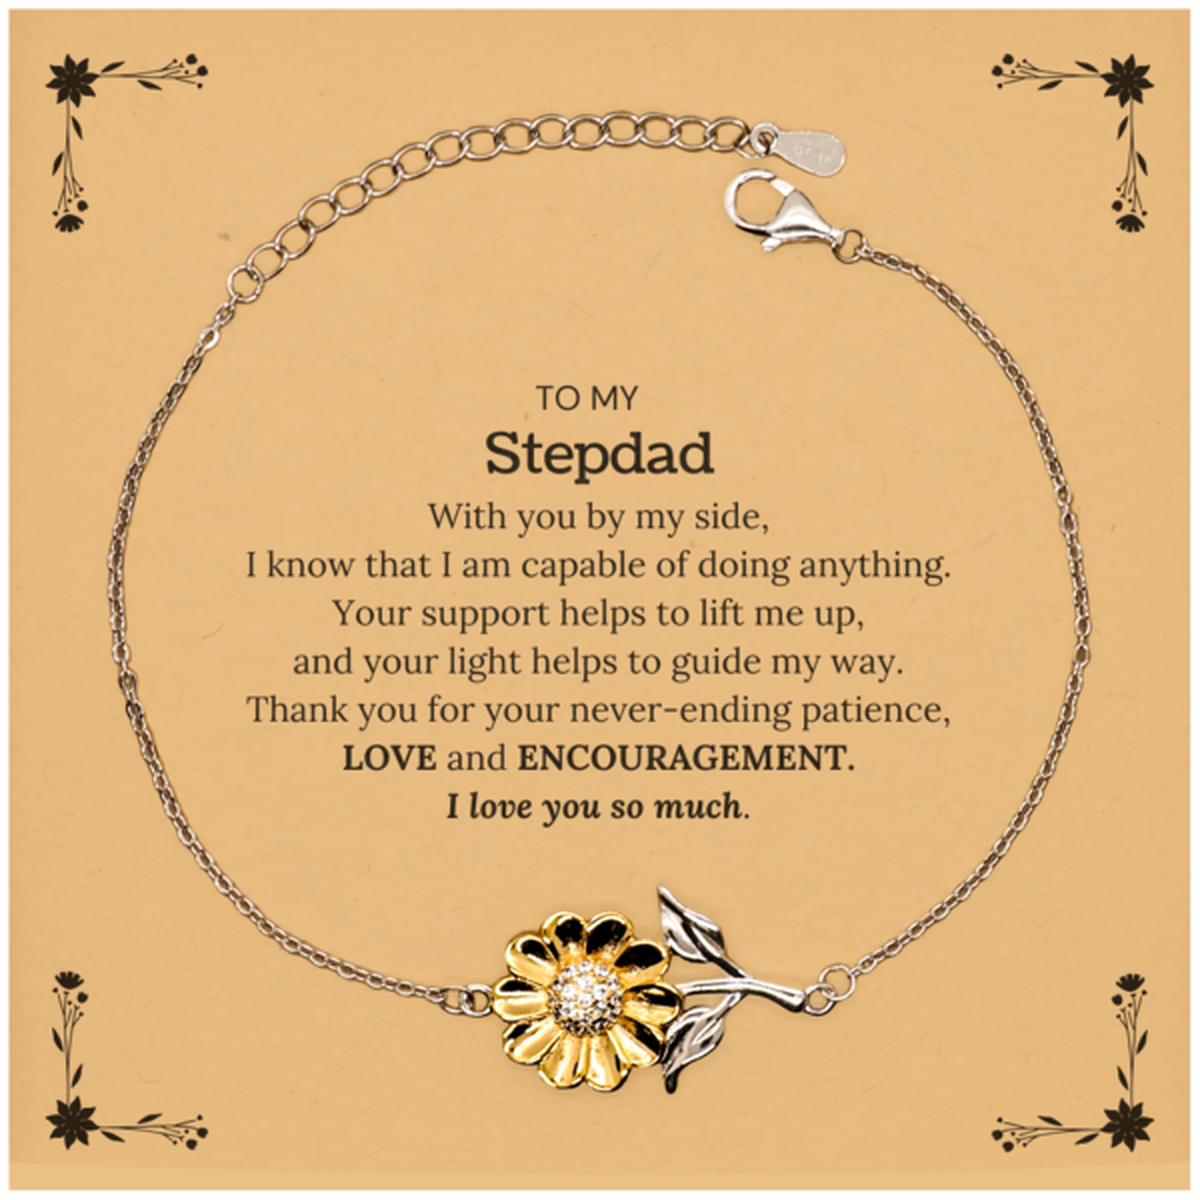 Appreciation Stepdad Sunflower Bracelet Gifts, To My Stepdad Birthday Christmas Wedding Keepsake Gifts for Stepdad With you by my side, I know that I am capable of doing anything. I love you so much